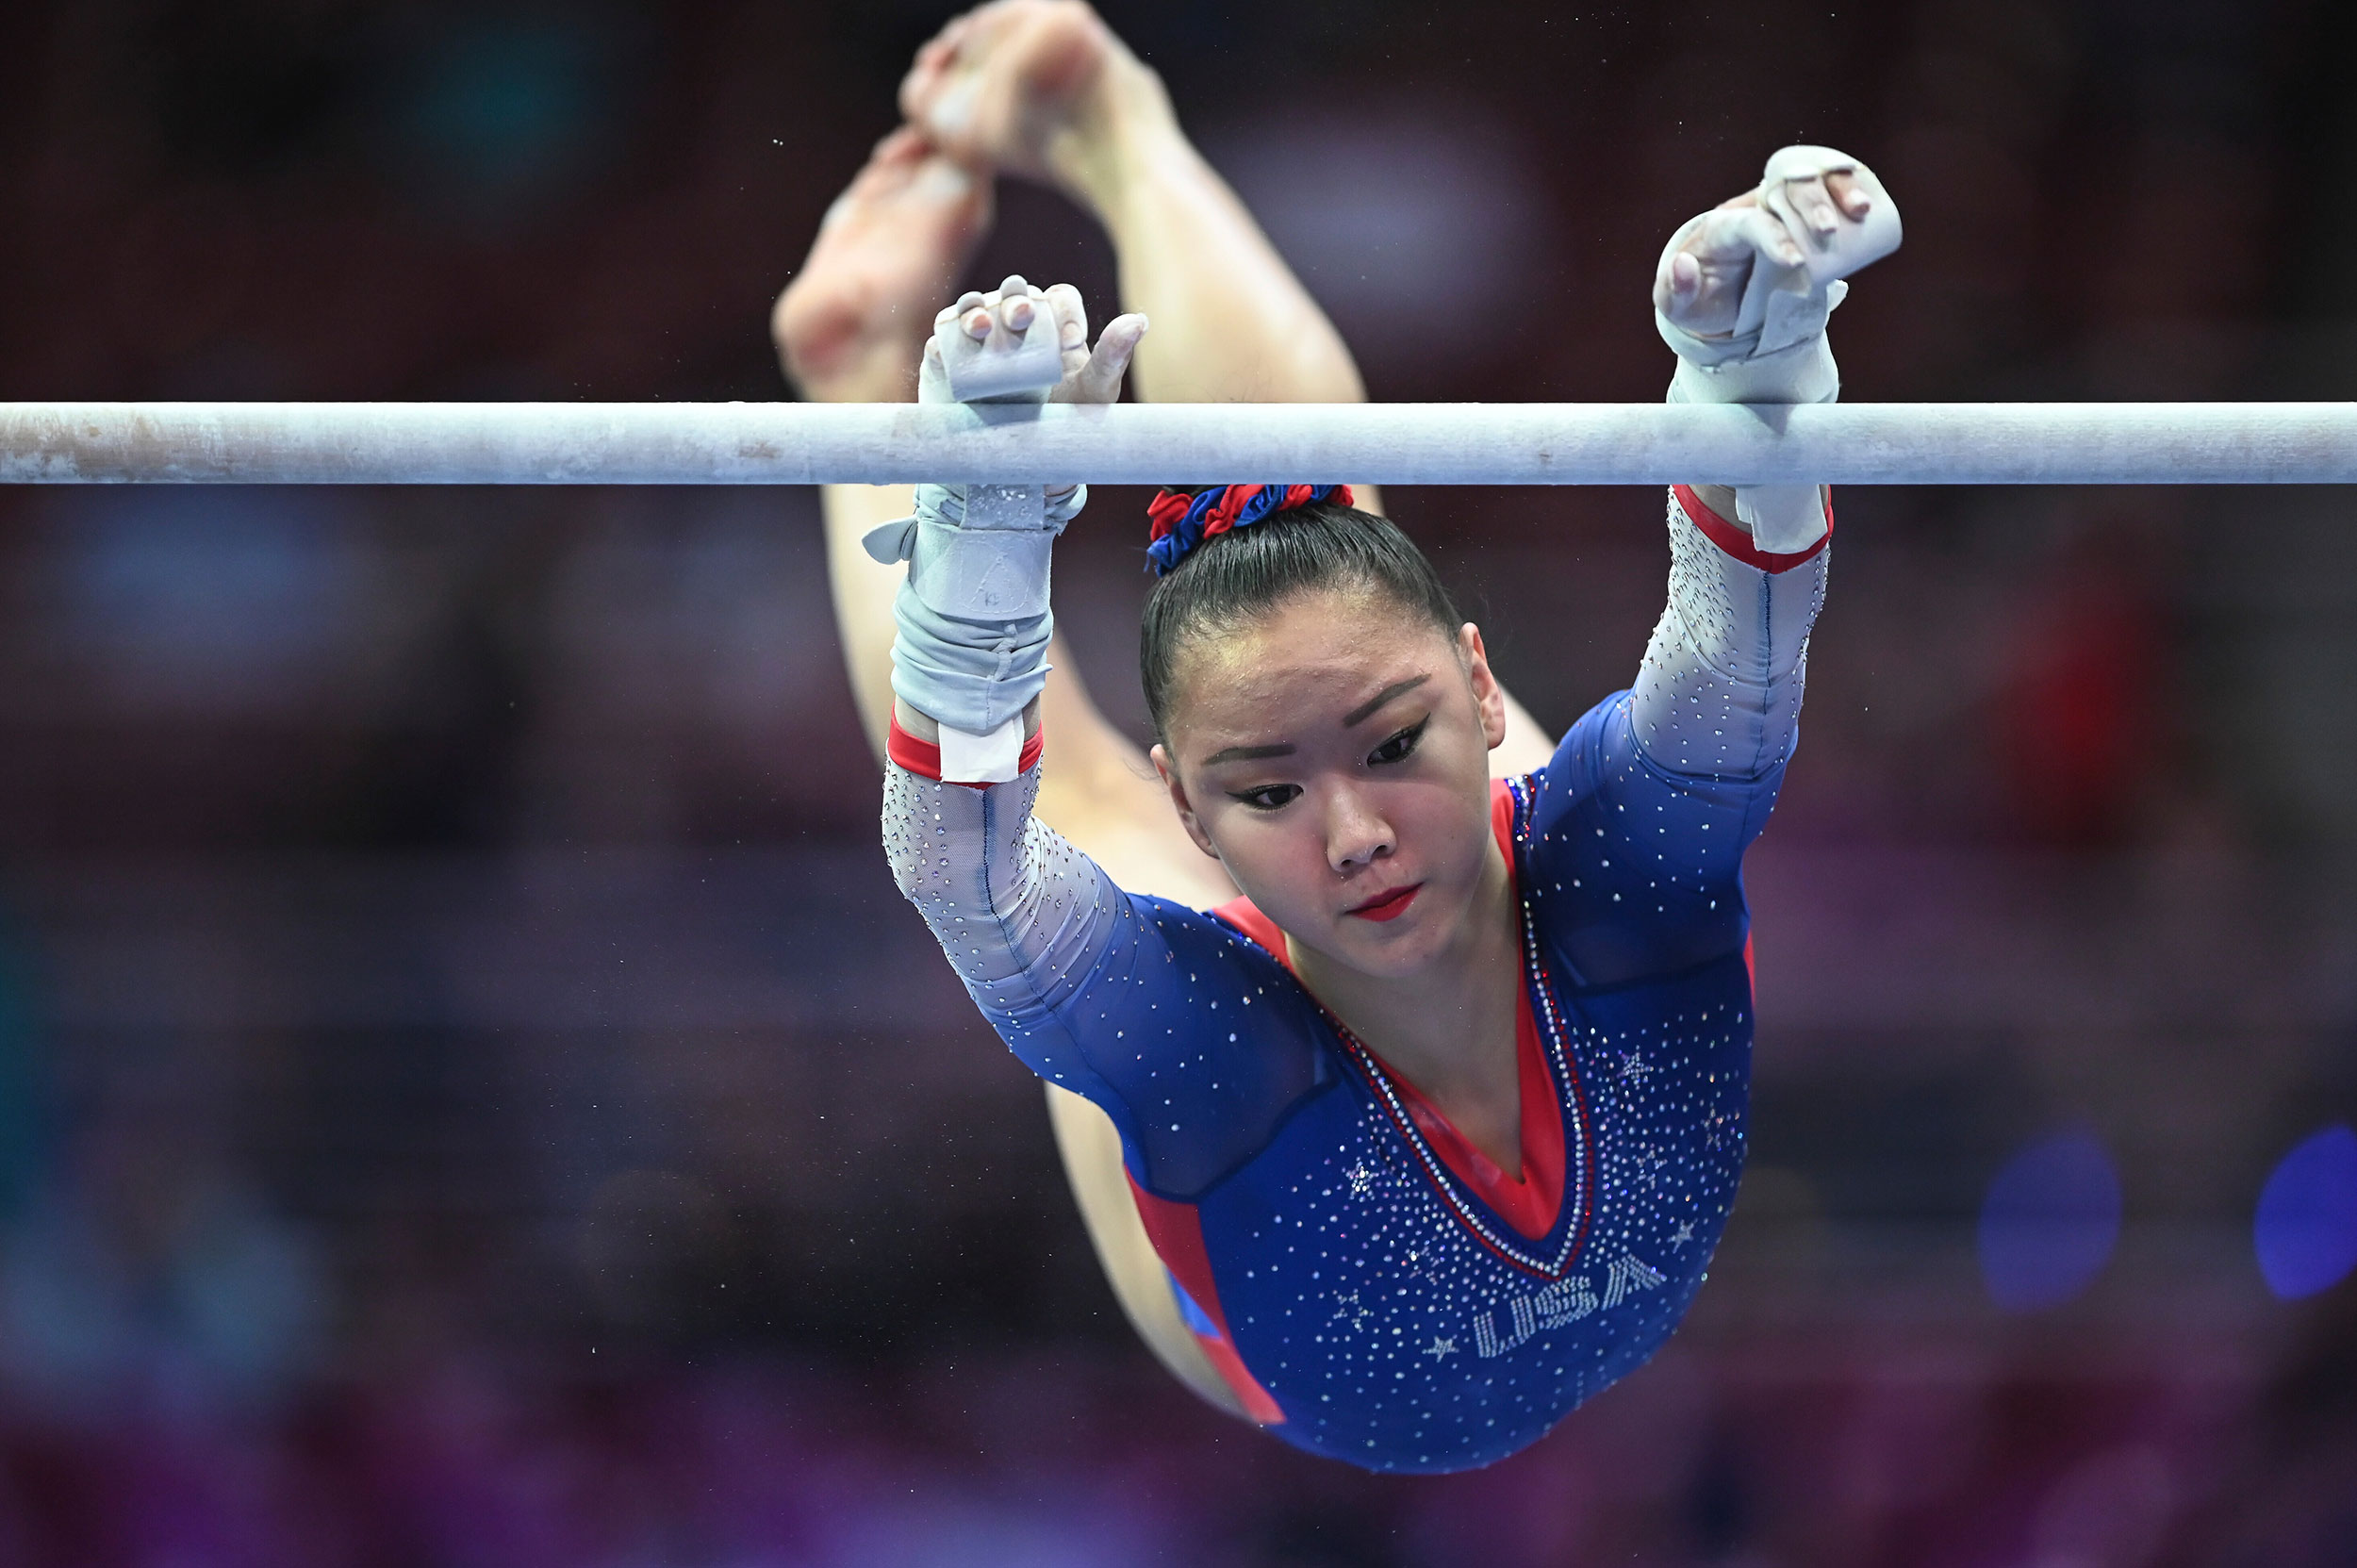 Kara Eaker competes on the uneven bars during US Olympic trials on June 27.